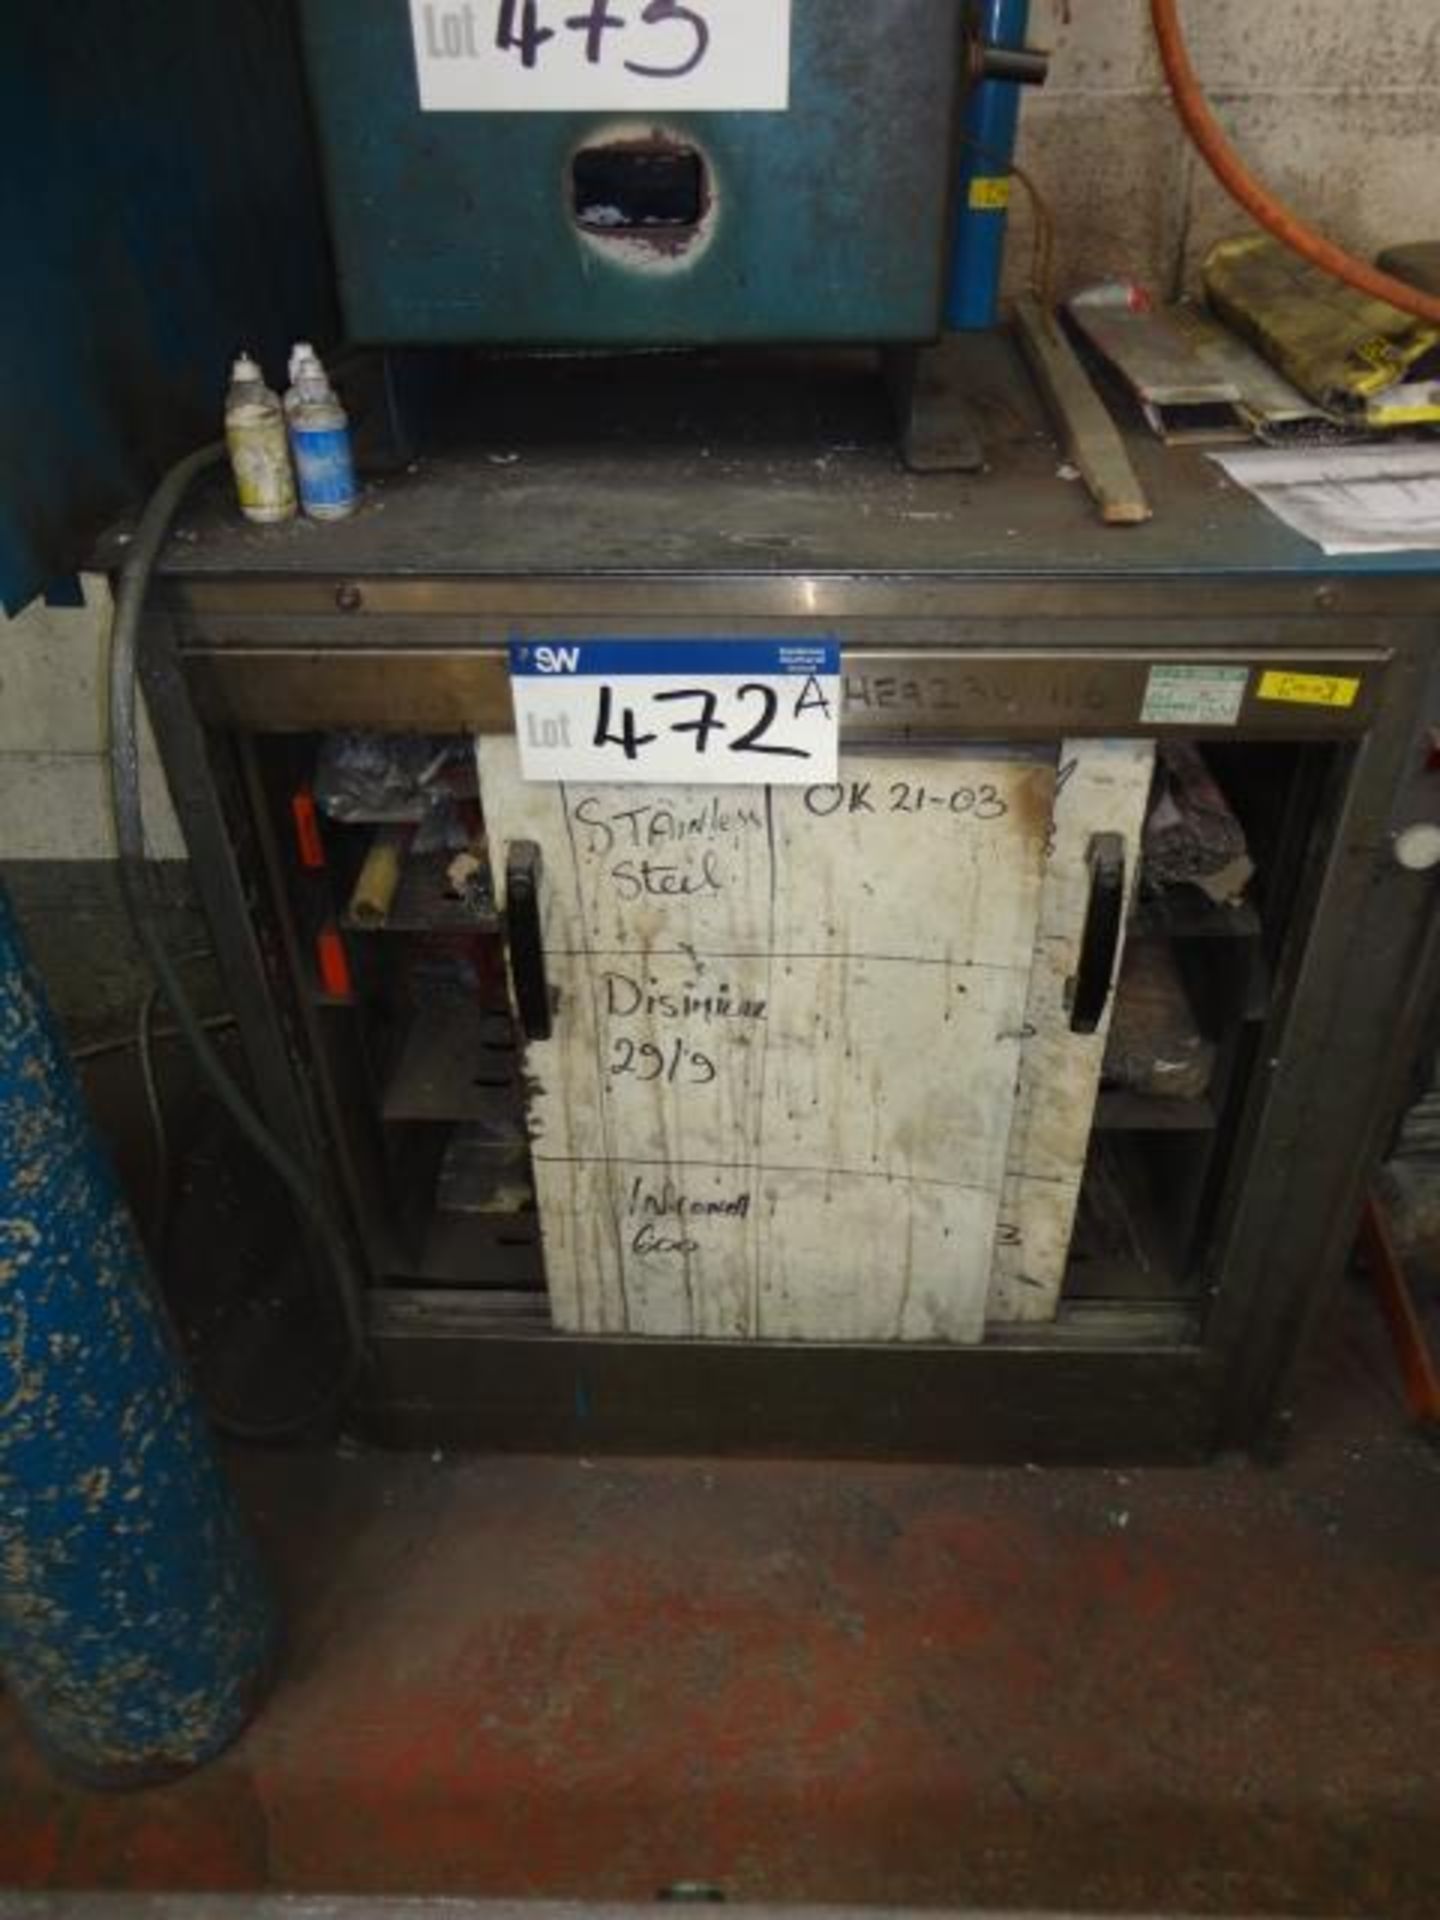 Welding Rod Oven, with welding rod contents